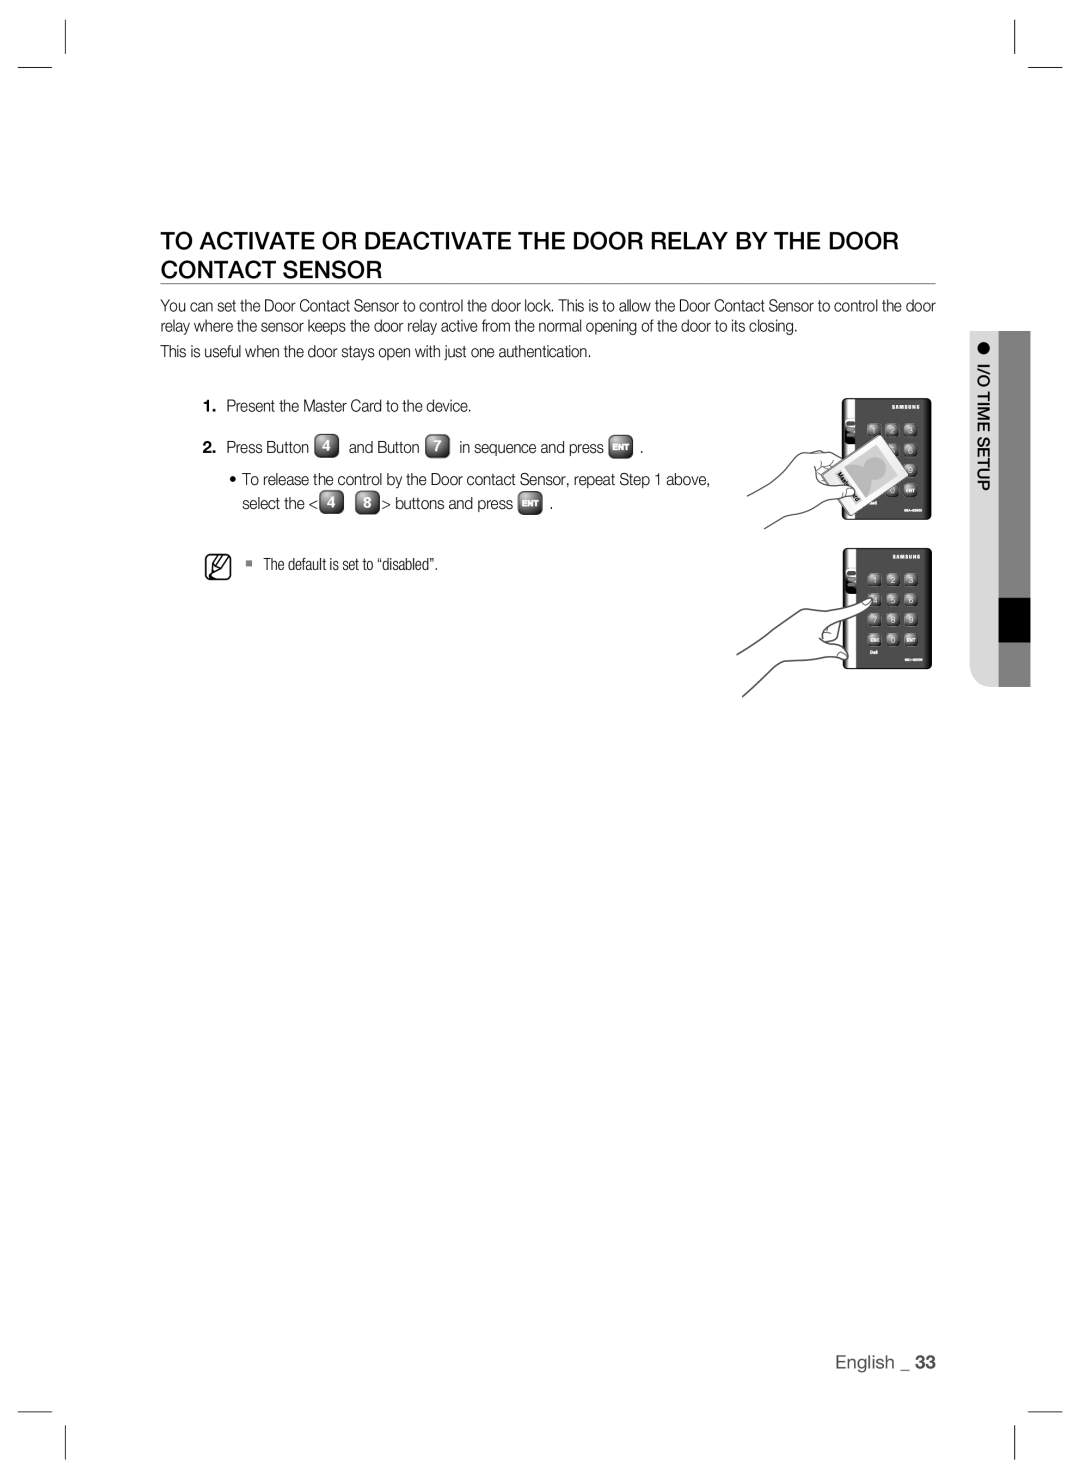 Samsung SSA-S2000W user manual English _, Present the Master Card to the device 